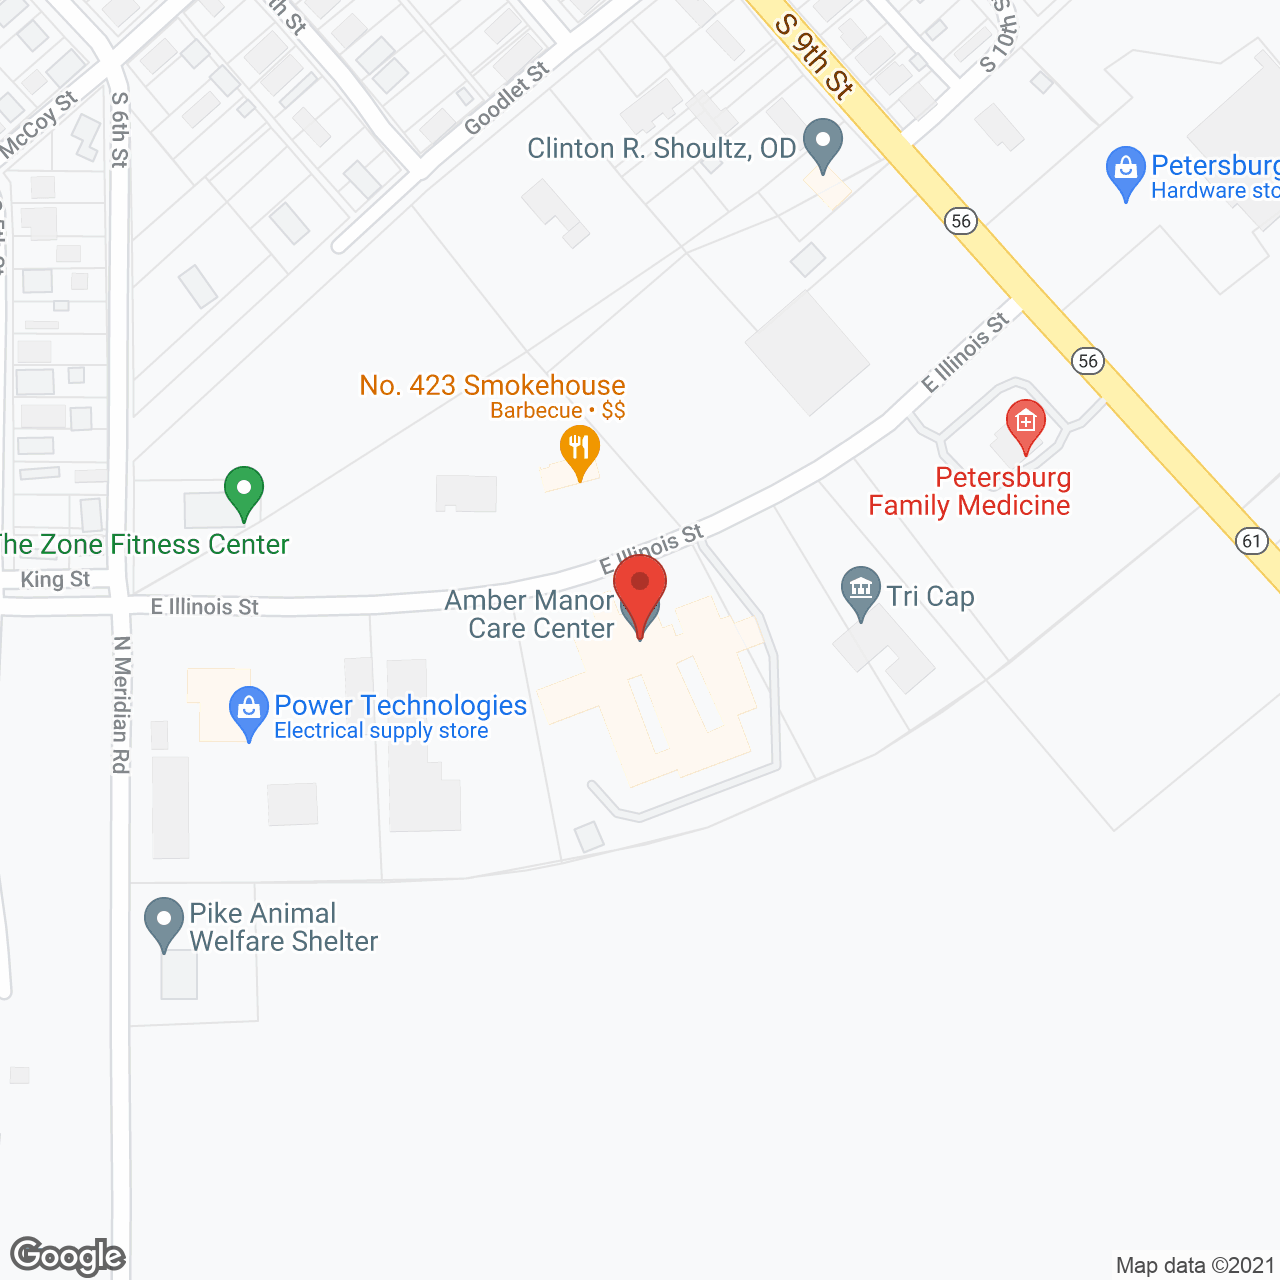 Amber Manor Care Center in google map